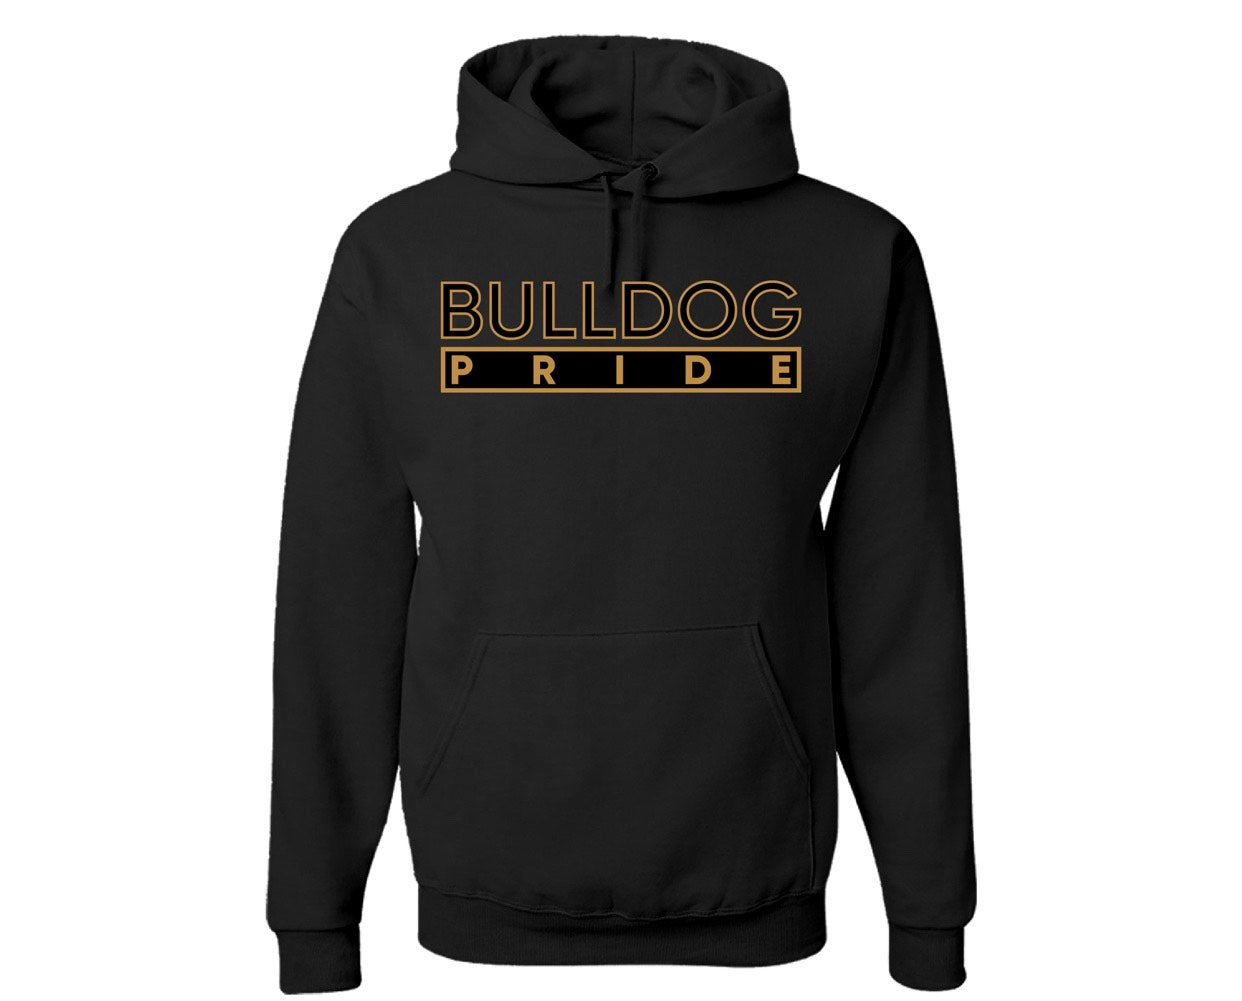 The "Bulldog Pride" Hoodie/Crew in Black and Gold (MD)